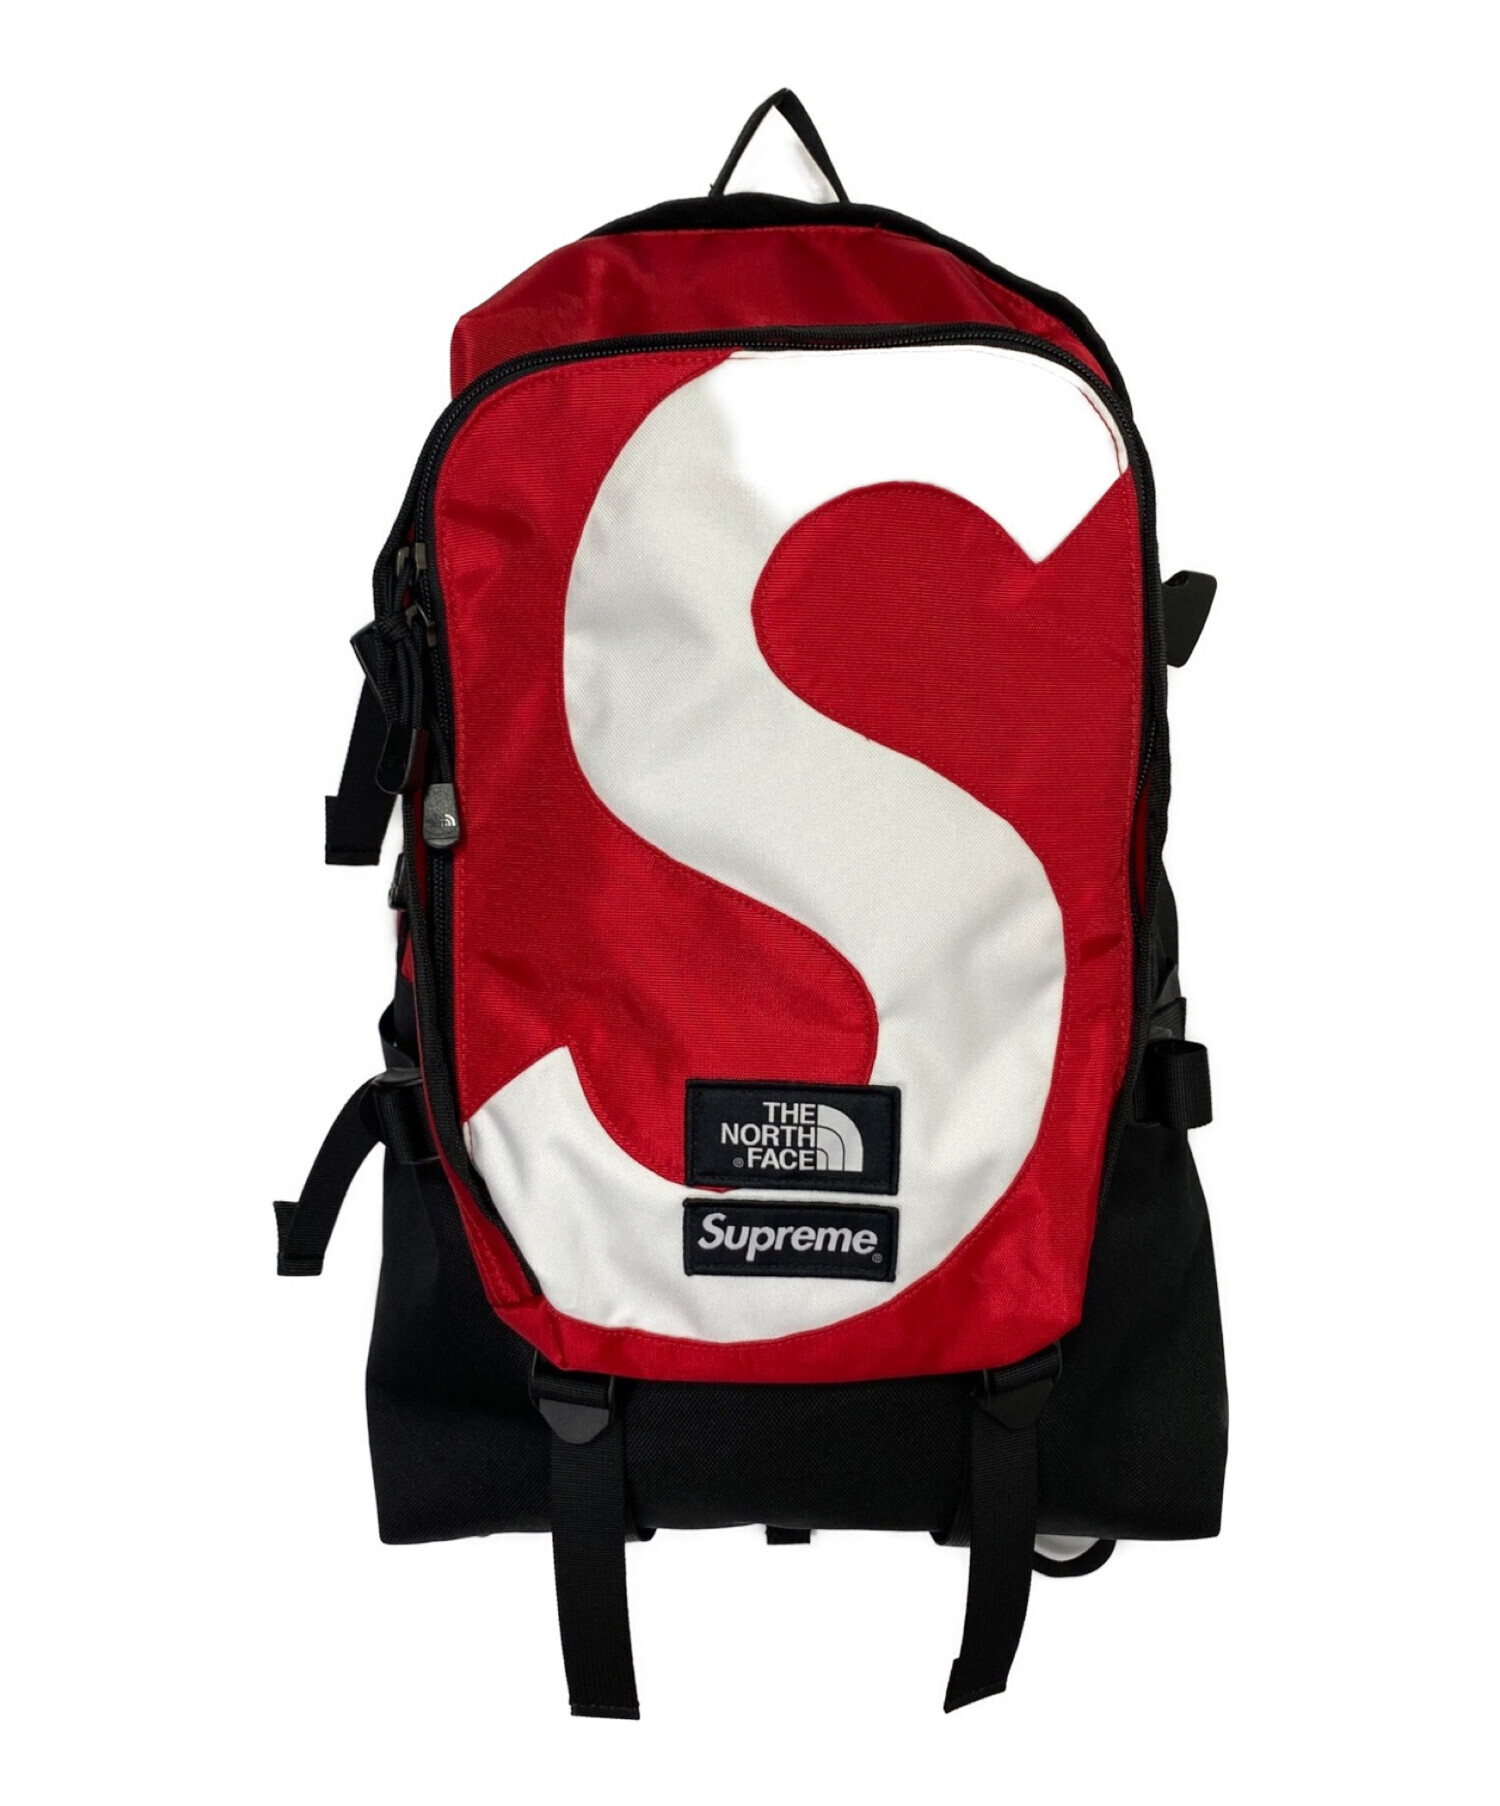 THE NORTH FACE (ザ ノース フェイス) SUPREME (シュプリーム) S Logo Expedition Backpack レッド